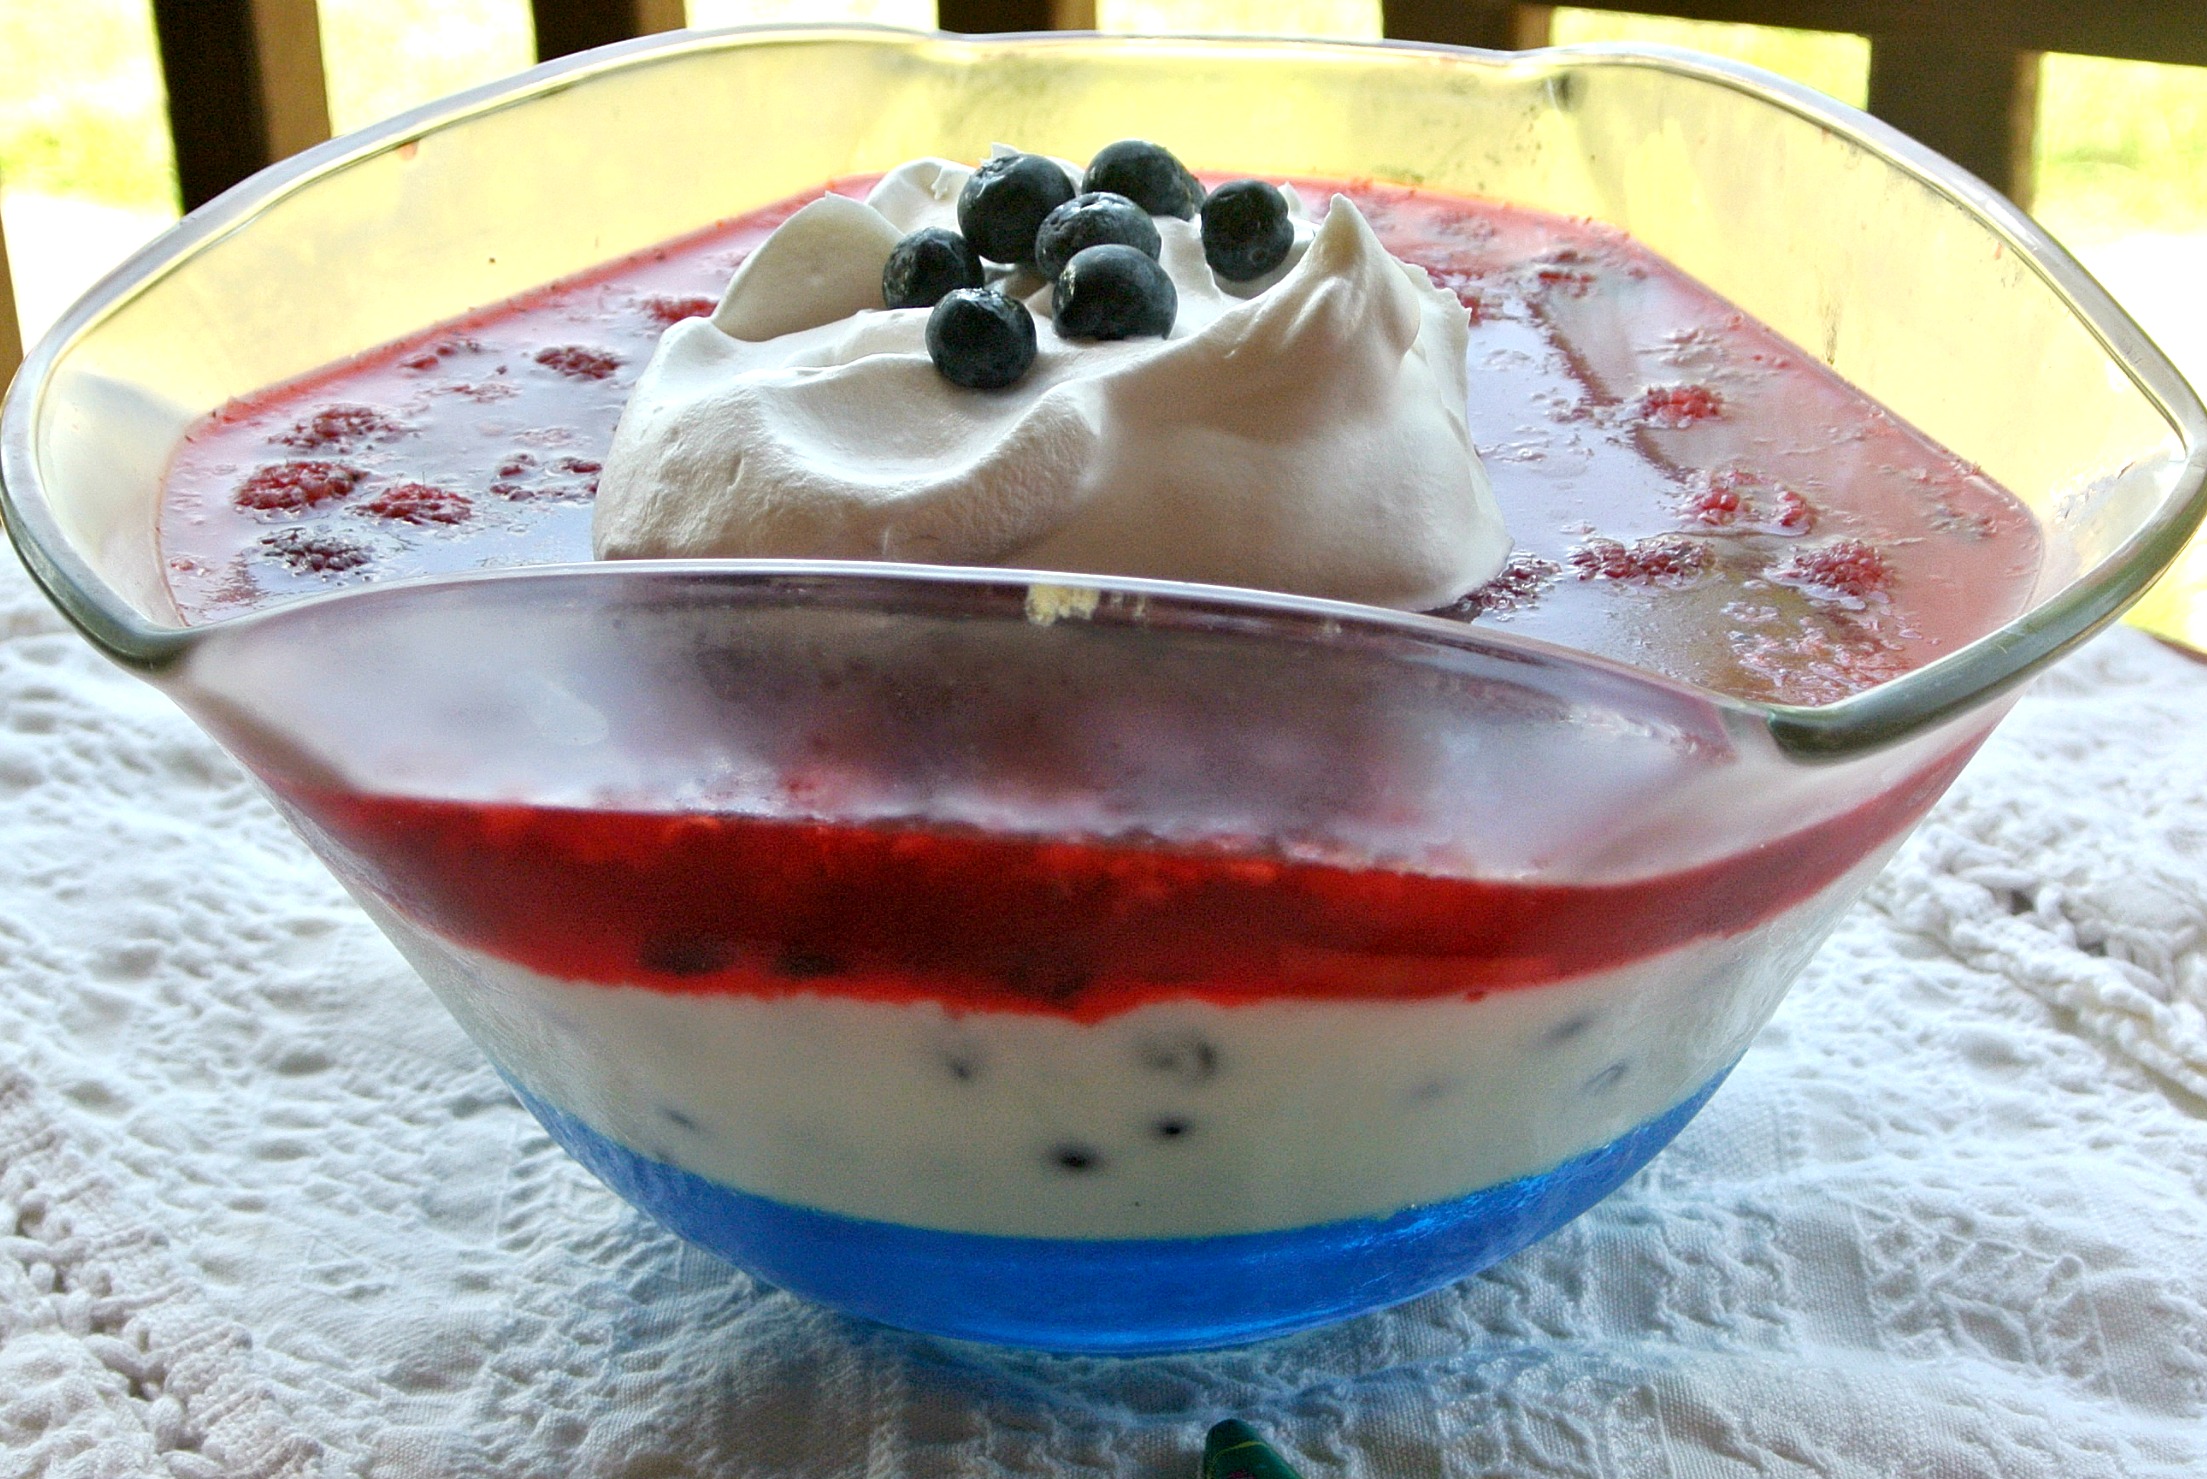 This salad is perfect for the 4th of July and includes raspberry and blueberry jellos, blueberries, raspberries, vanilla yogurt, gelatin, heavy whipping cream, sugar, and whipped topping.